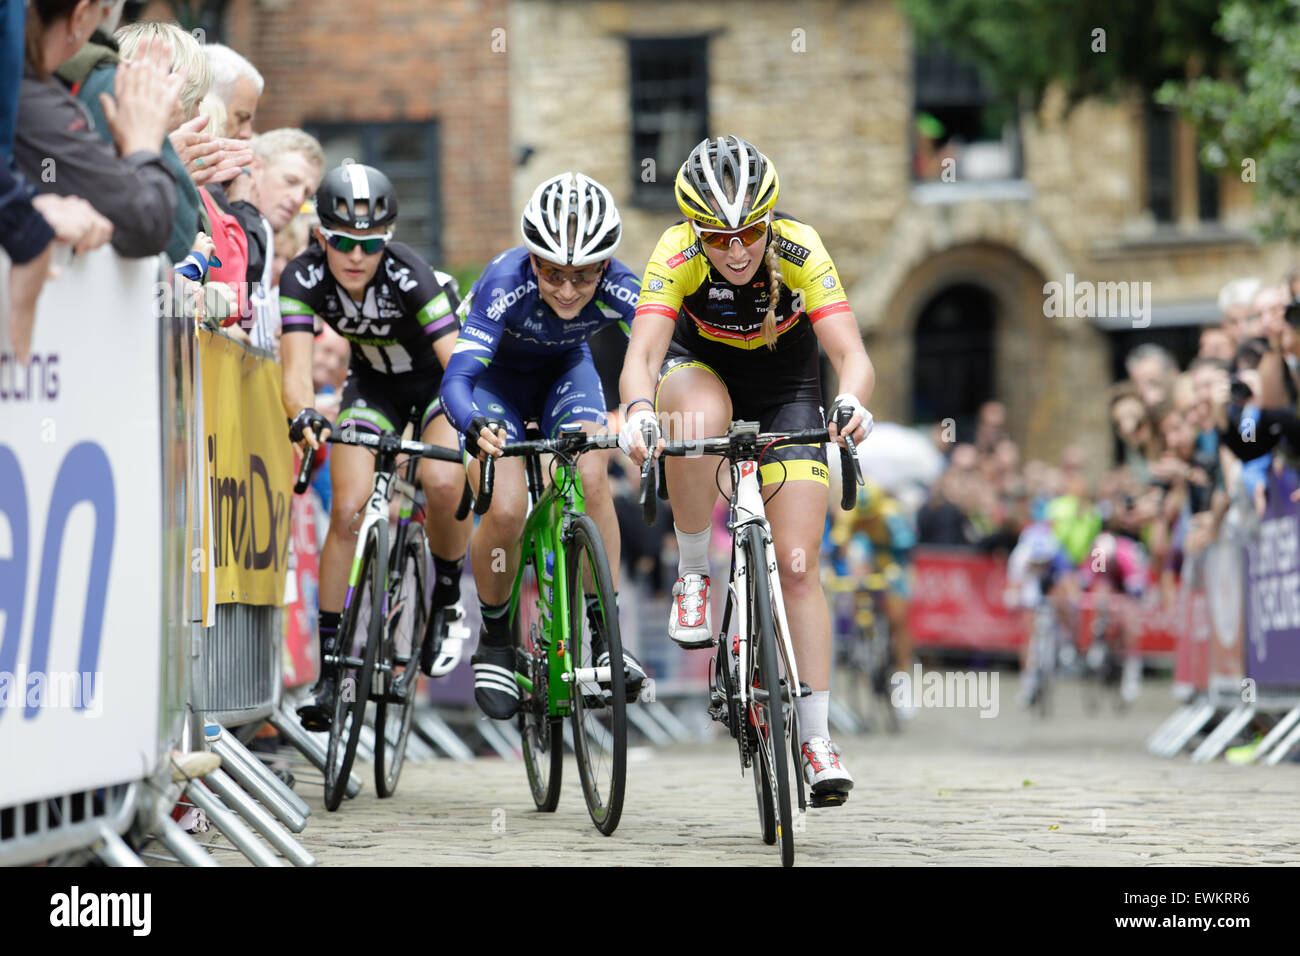 Womens National Road Race Championships 2015 - Battle for Silver and Bronze Metal Positions Stock Photo